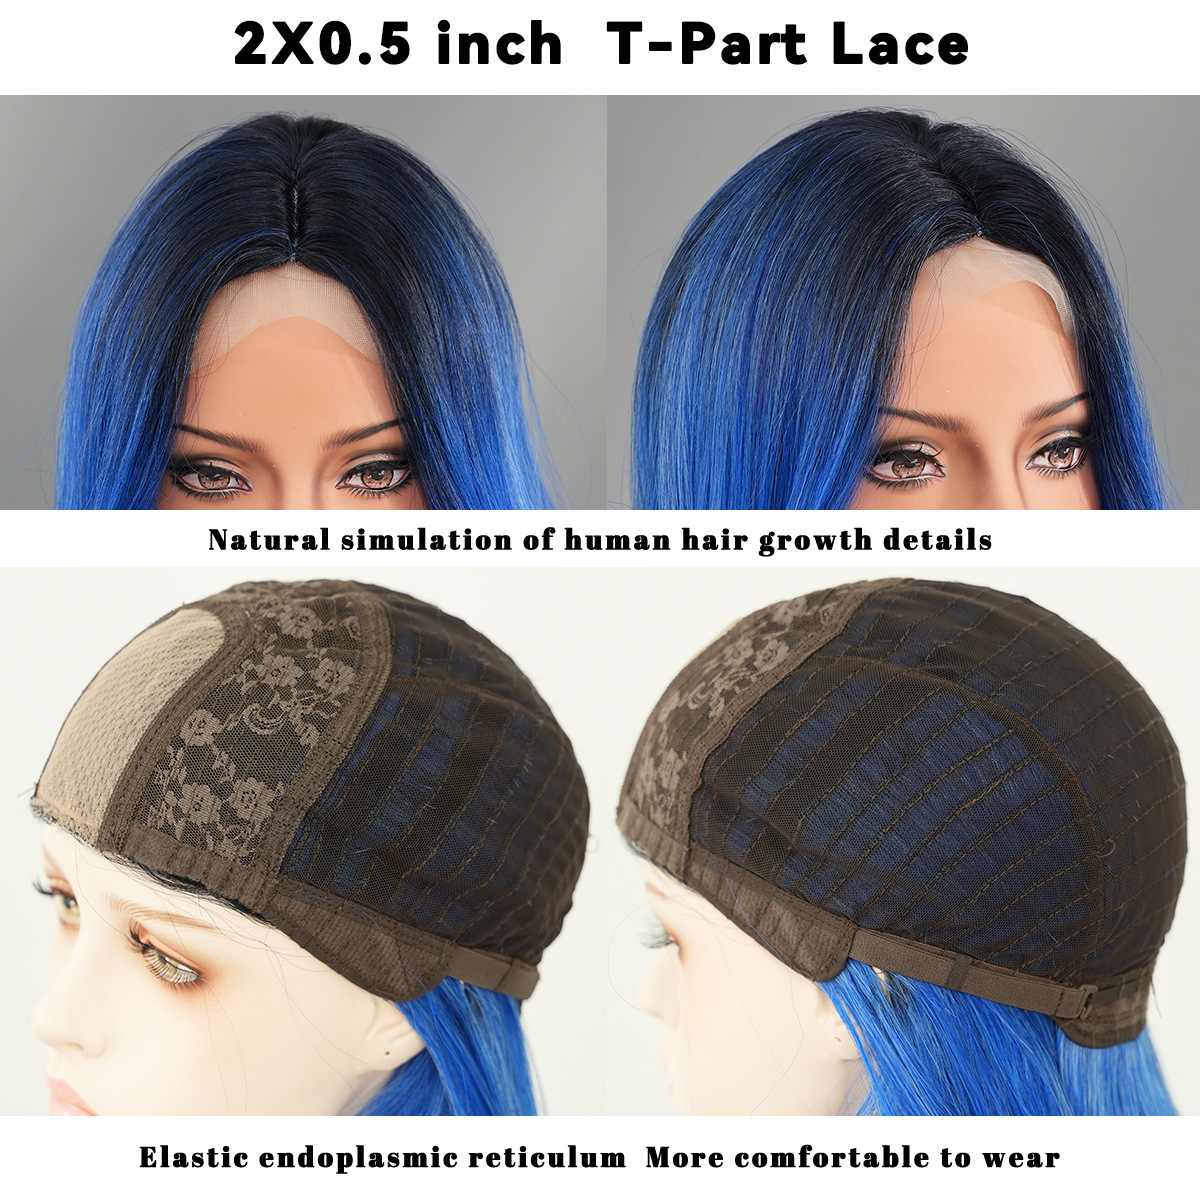 Stylish synthetic wig with small lace, featuring iris blue gradient color and wavy long curly hair